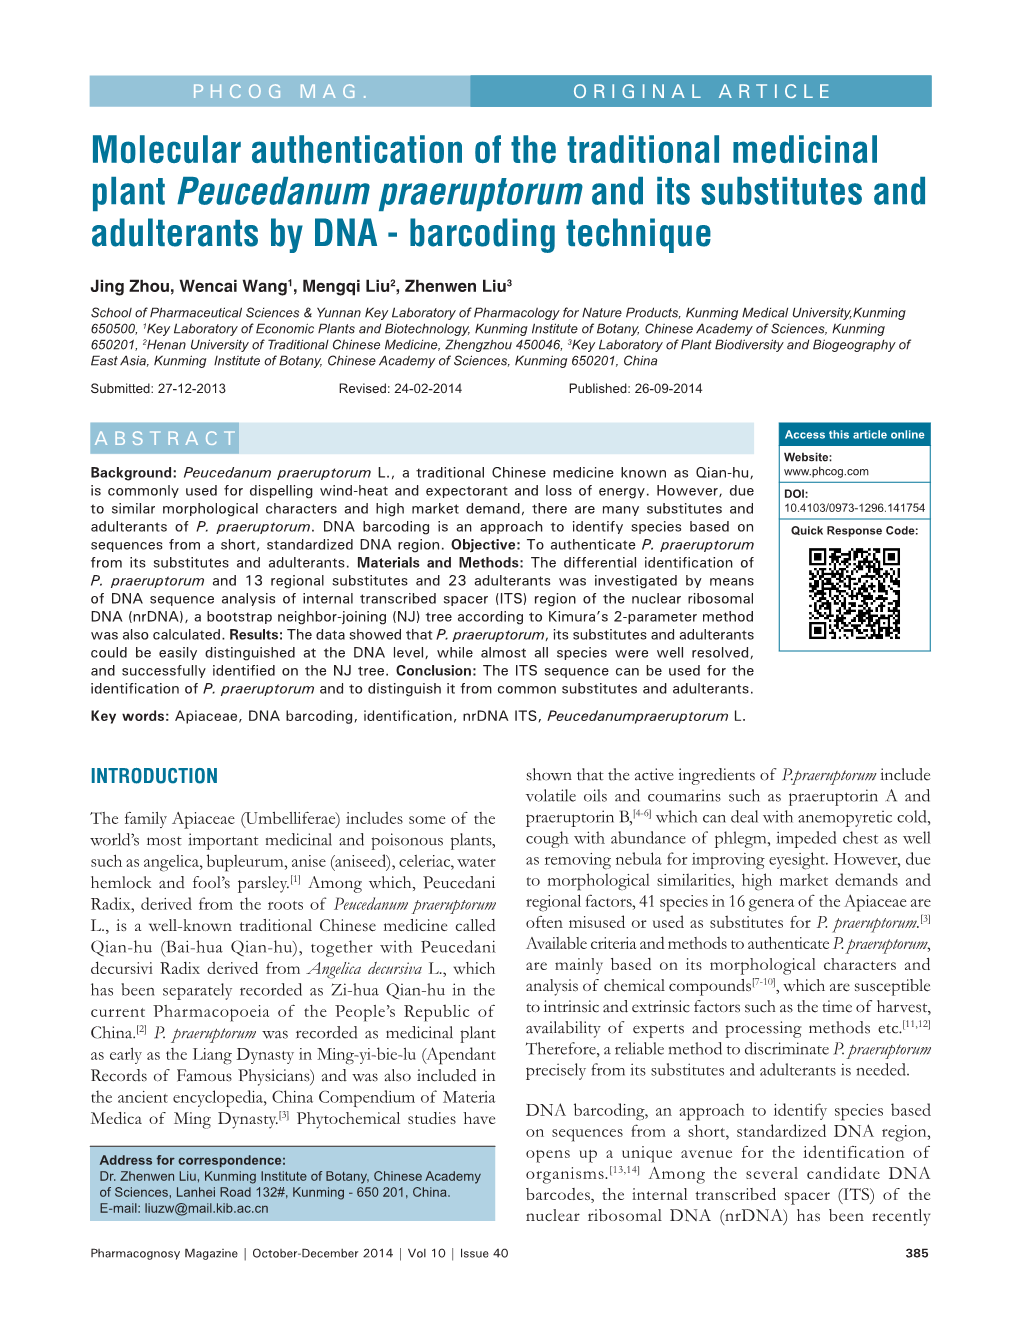 Molecular Authentication of the Traditional Medicinal Plant Peucedanum Praeruptorum and Its Substitutes and Adulterants by DNA ‑ Barcoding Technique